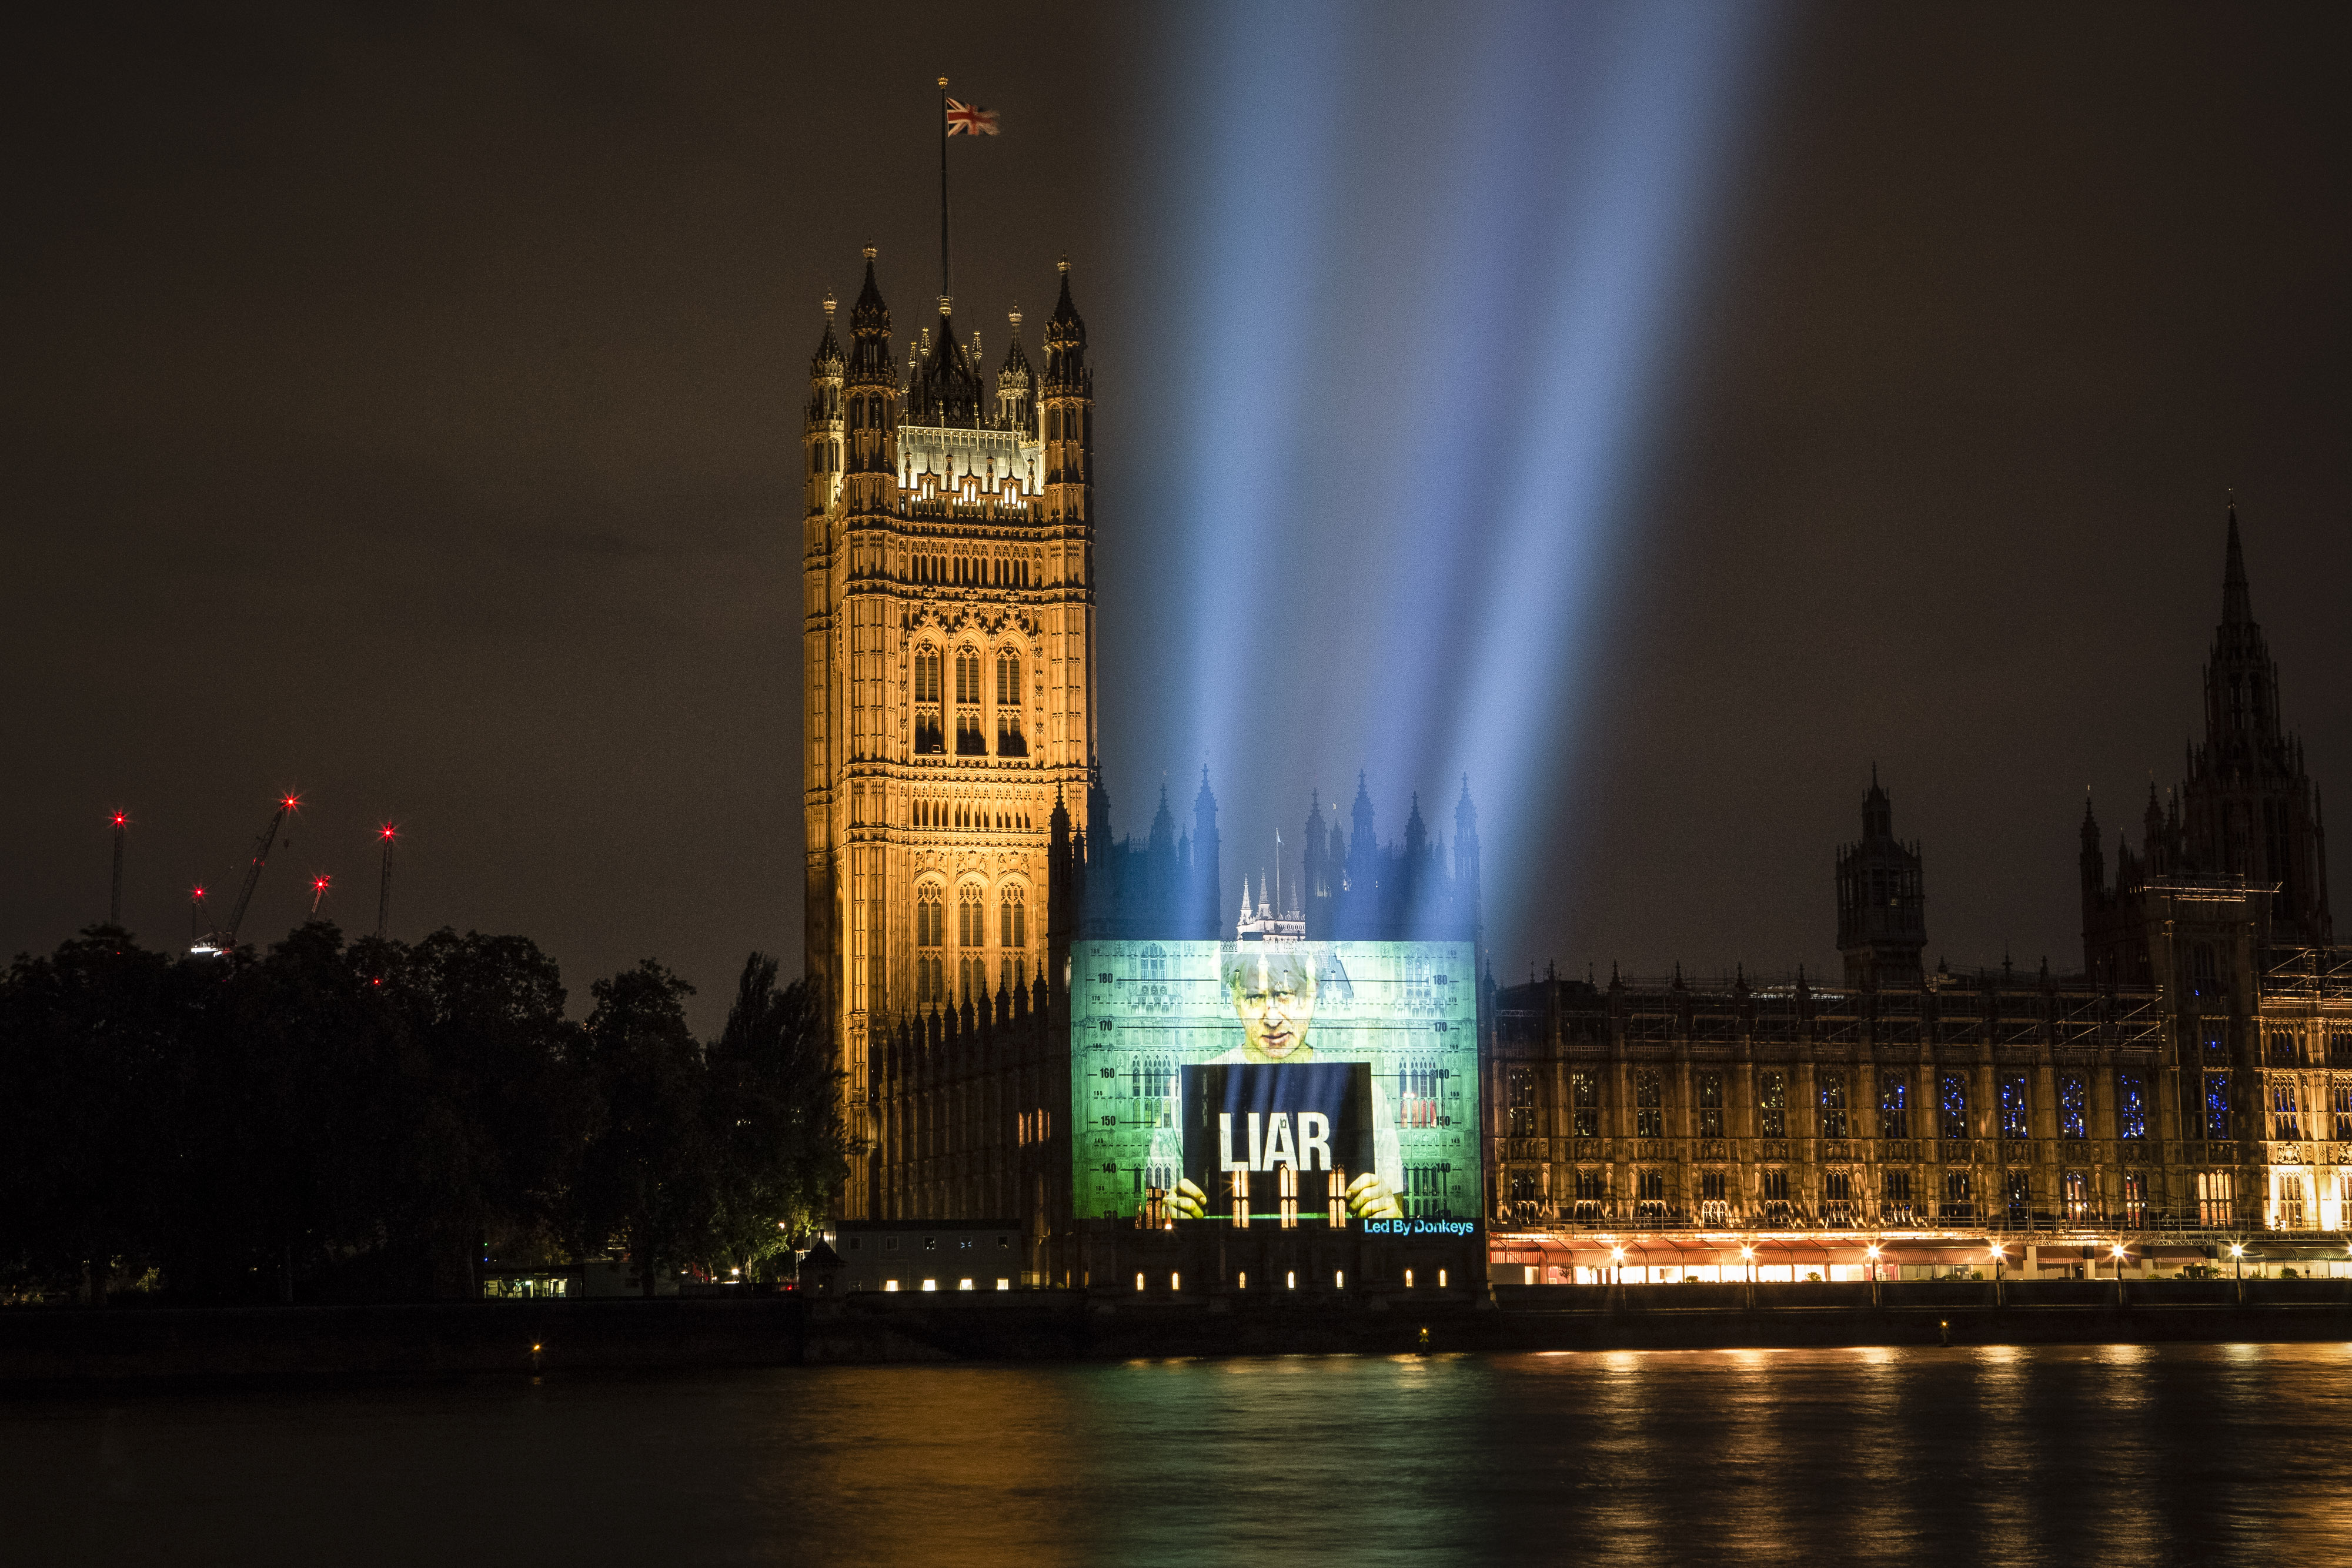 The projection on the side of Parliament